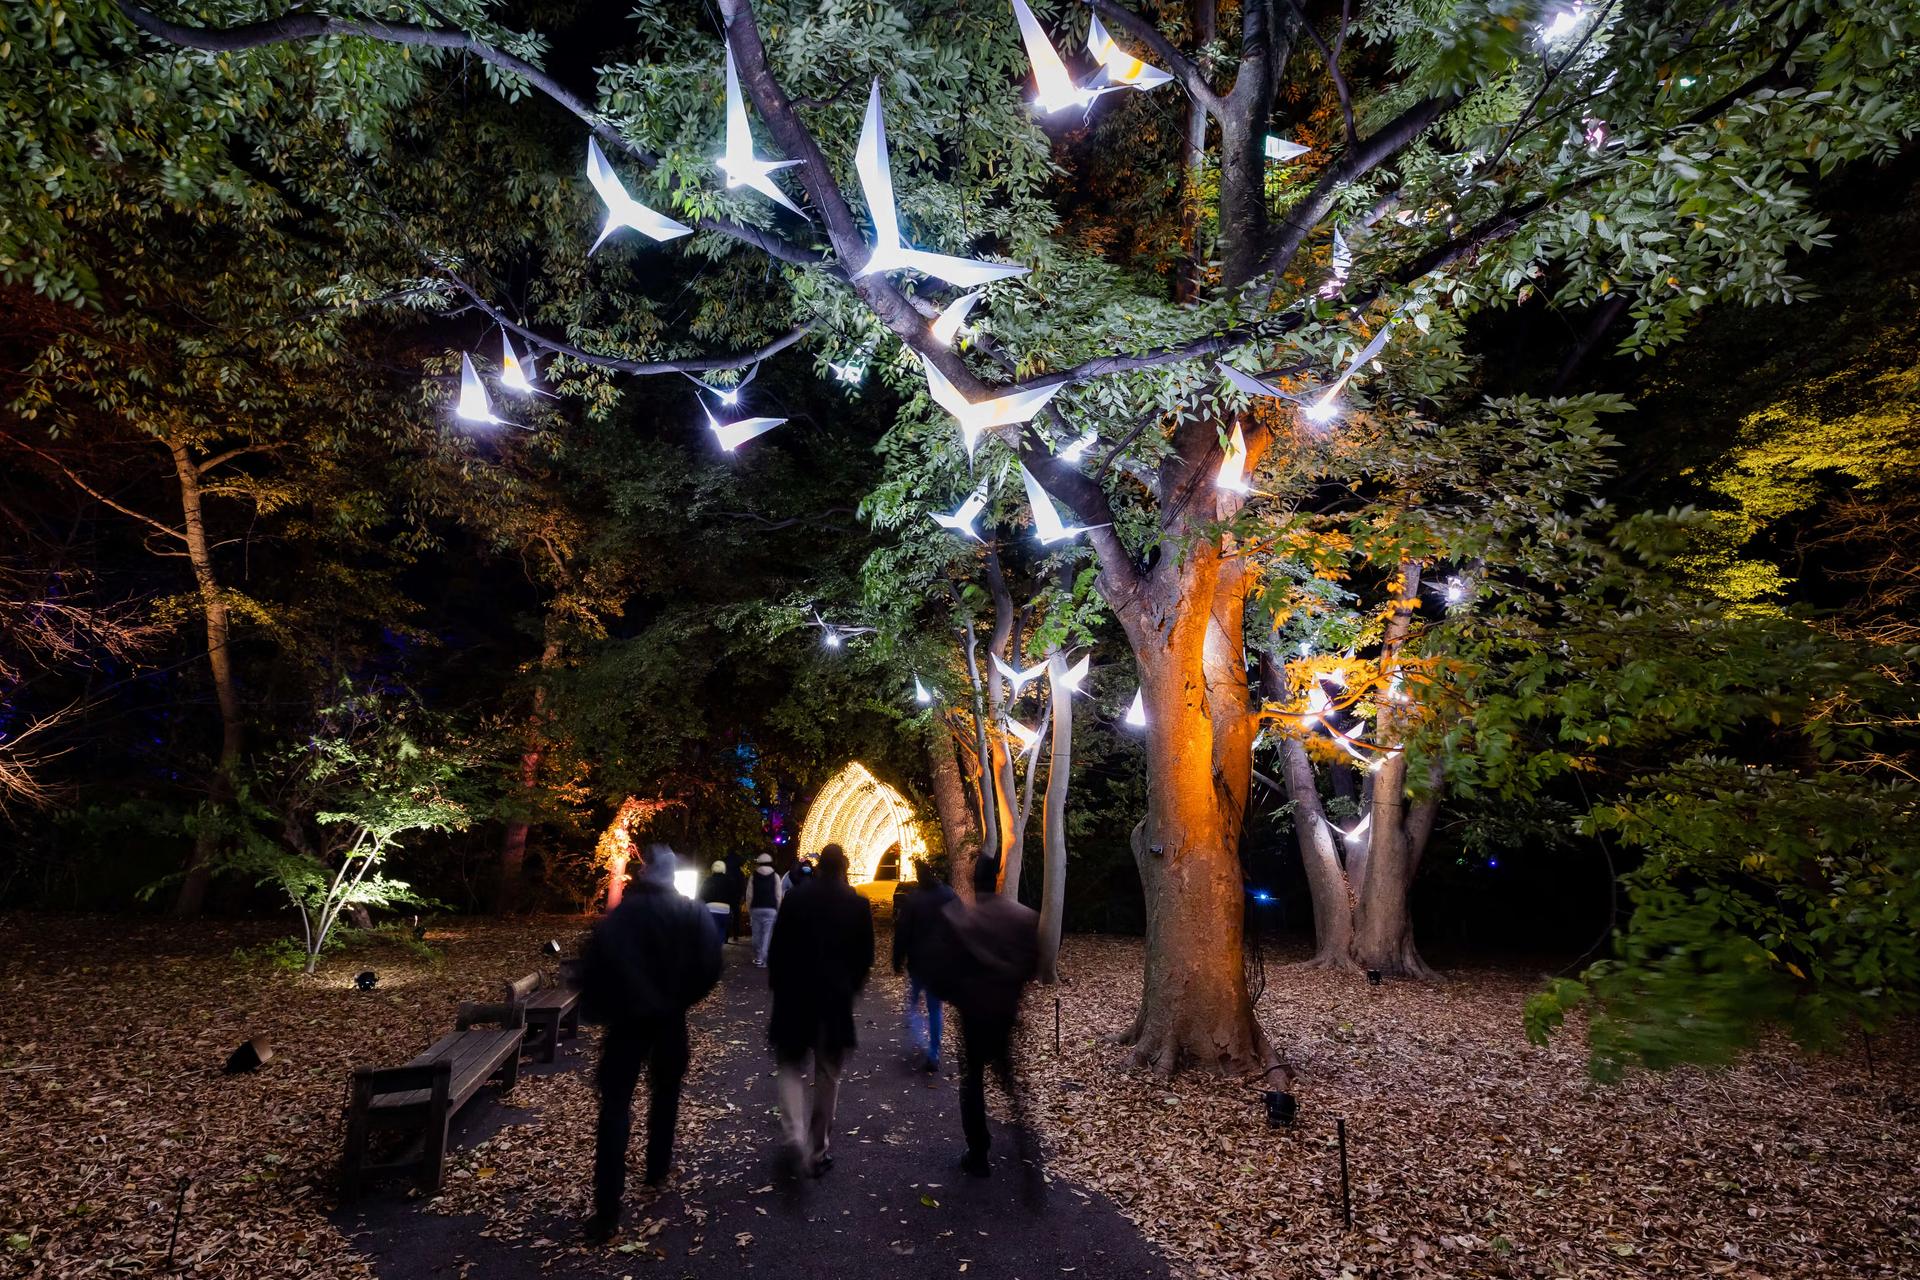 People walking under illuminated white origami-style cranes, hanging from trees at the Brooklyn Botanic Garden